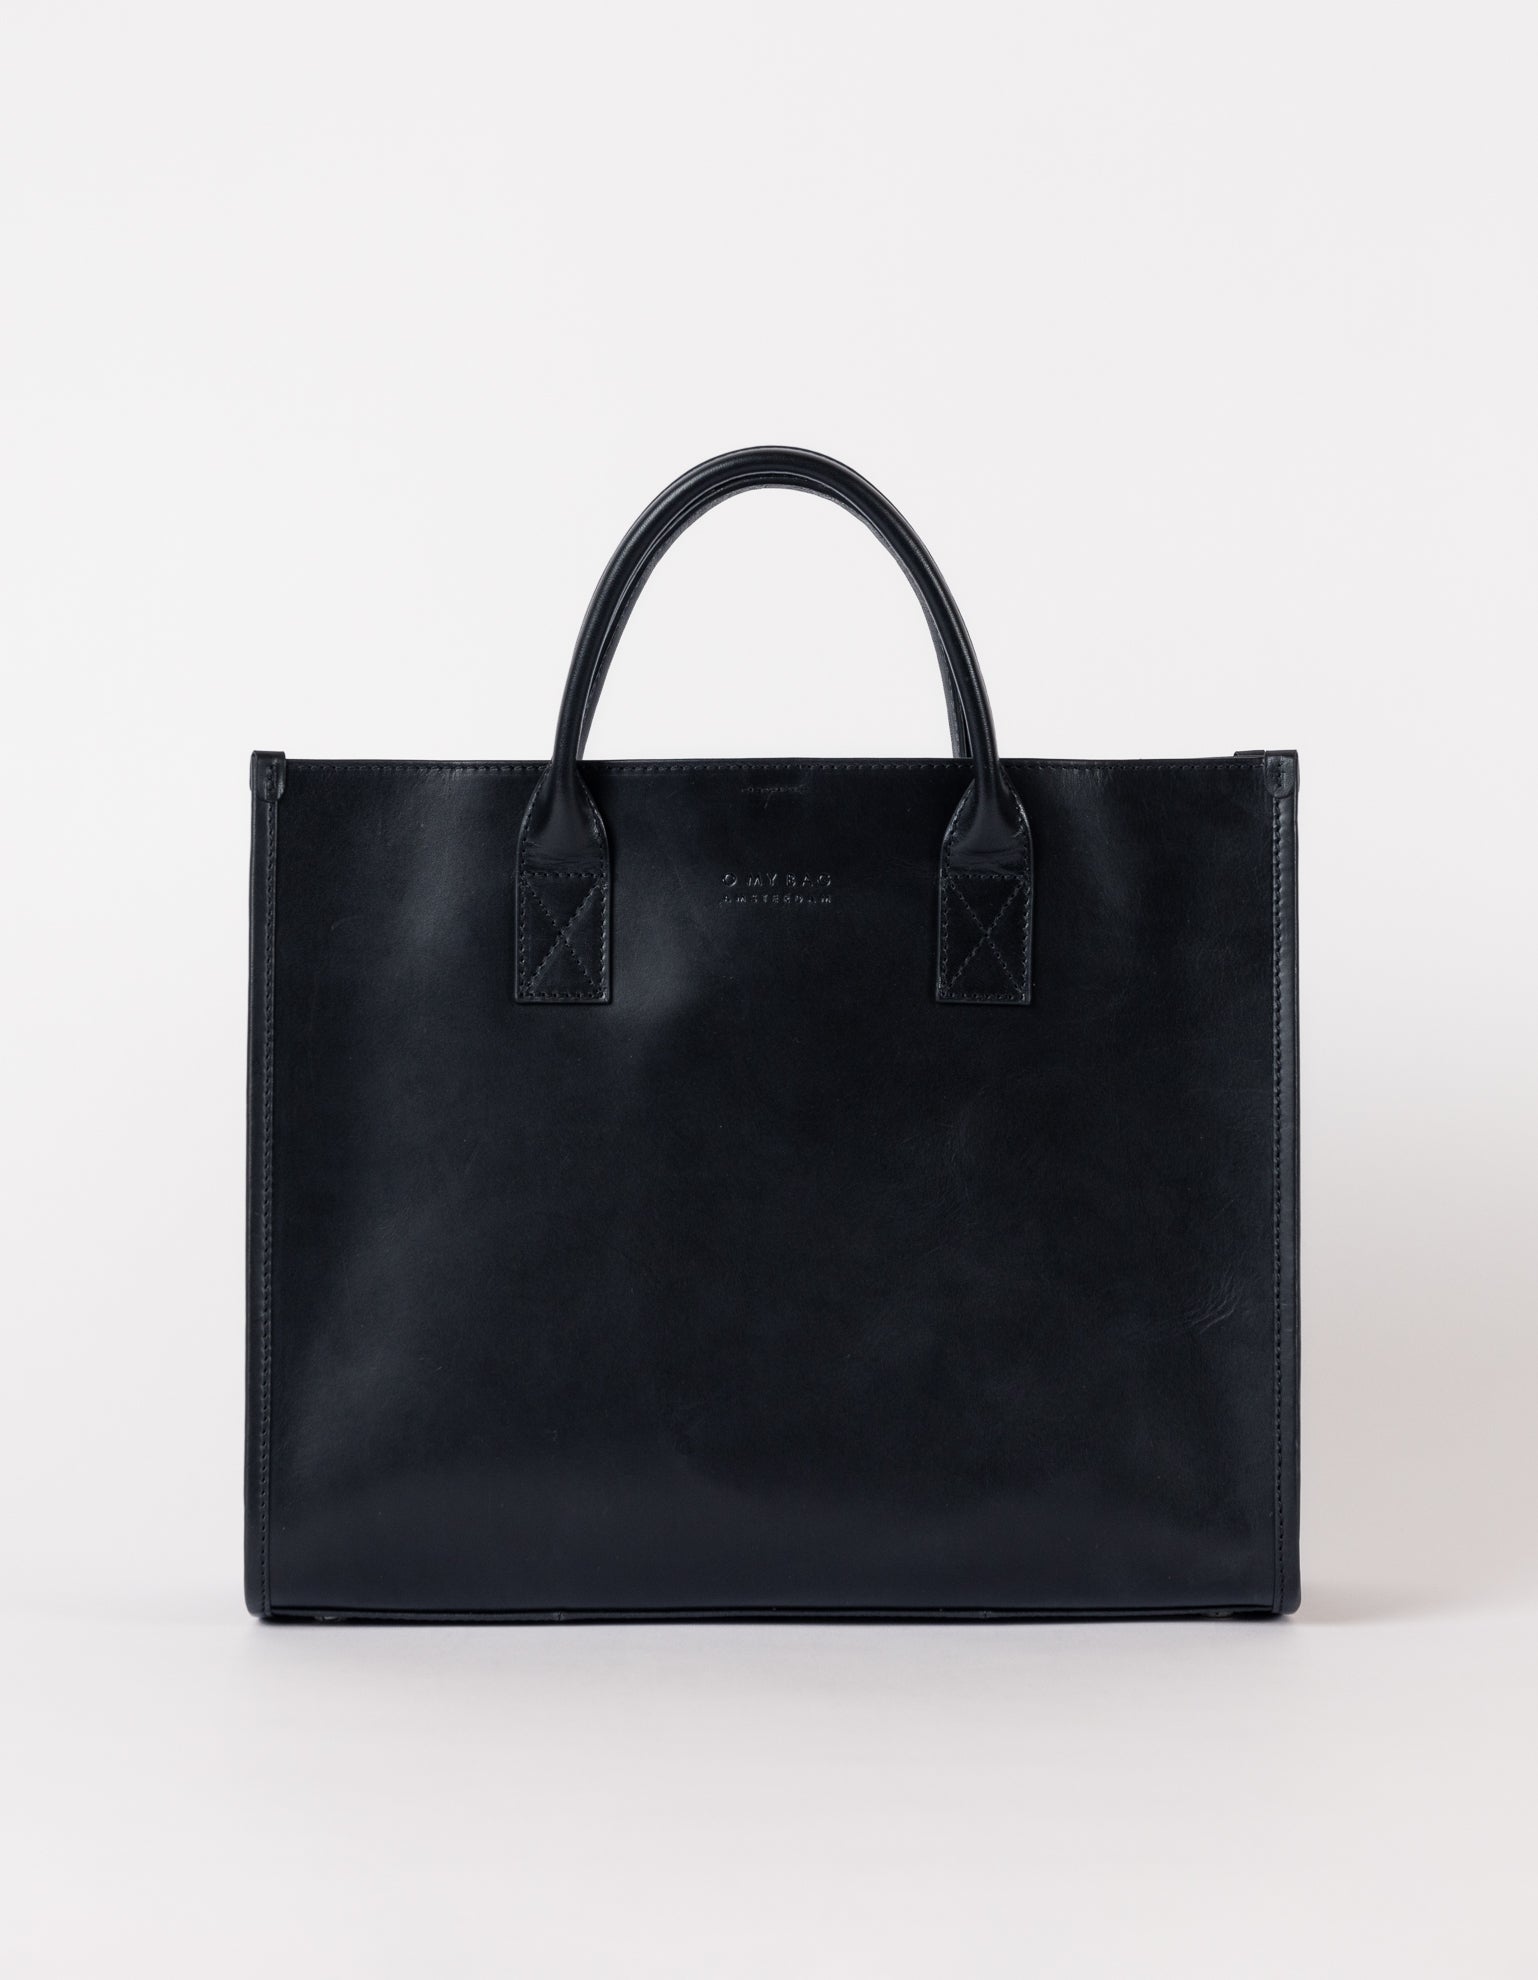 Rectangle shaped leather tote bag - front product image